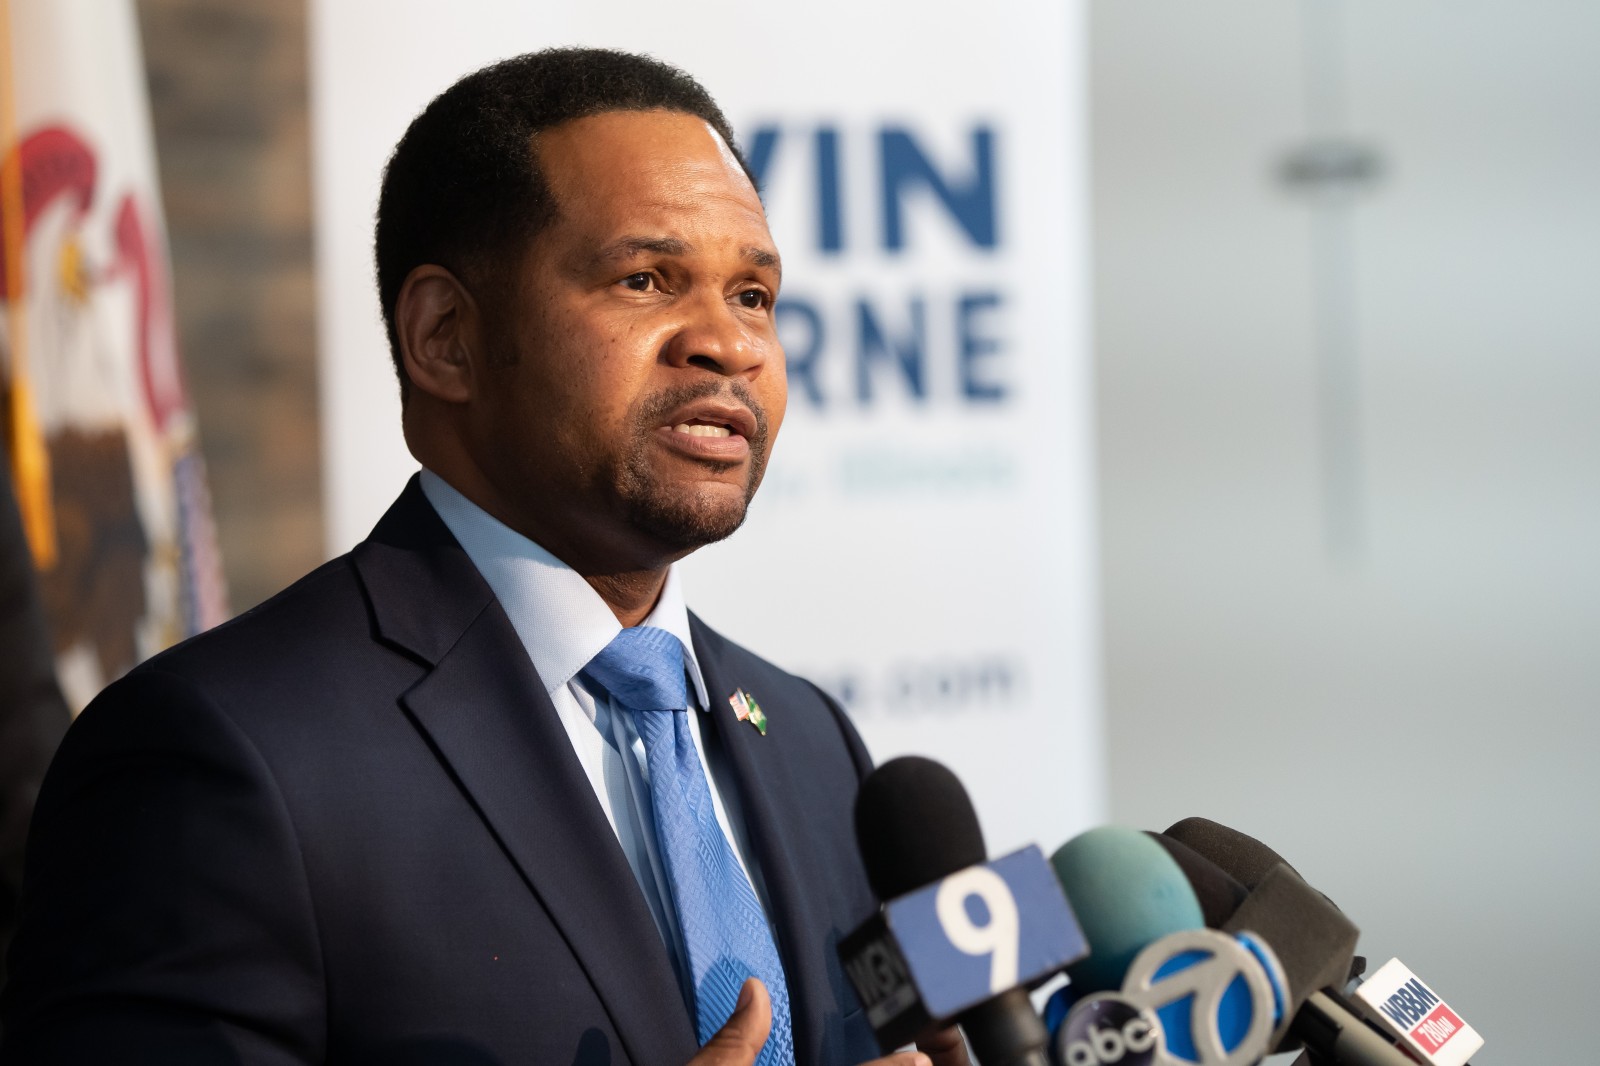 Illinois gubernatorial candidate Richard Irvin dodges questions on a federal abortion ban – Illinois Newsroom